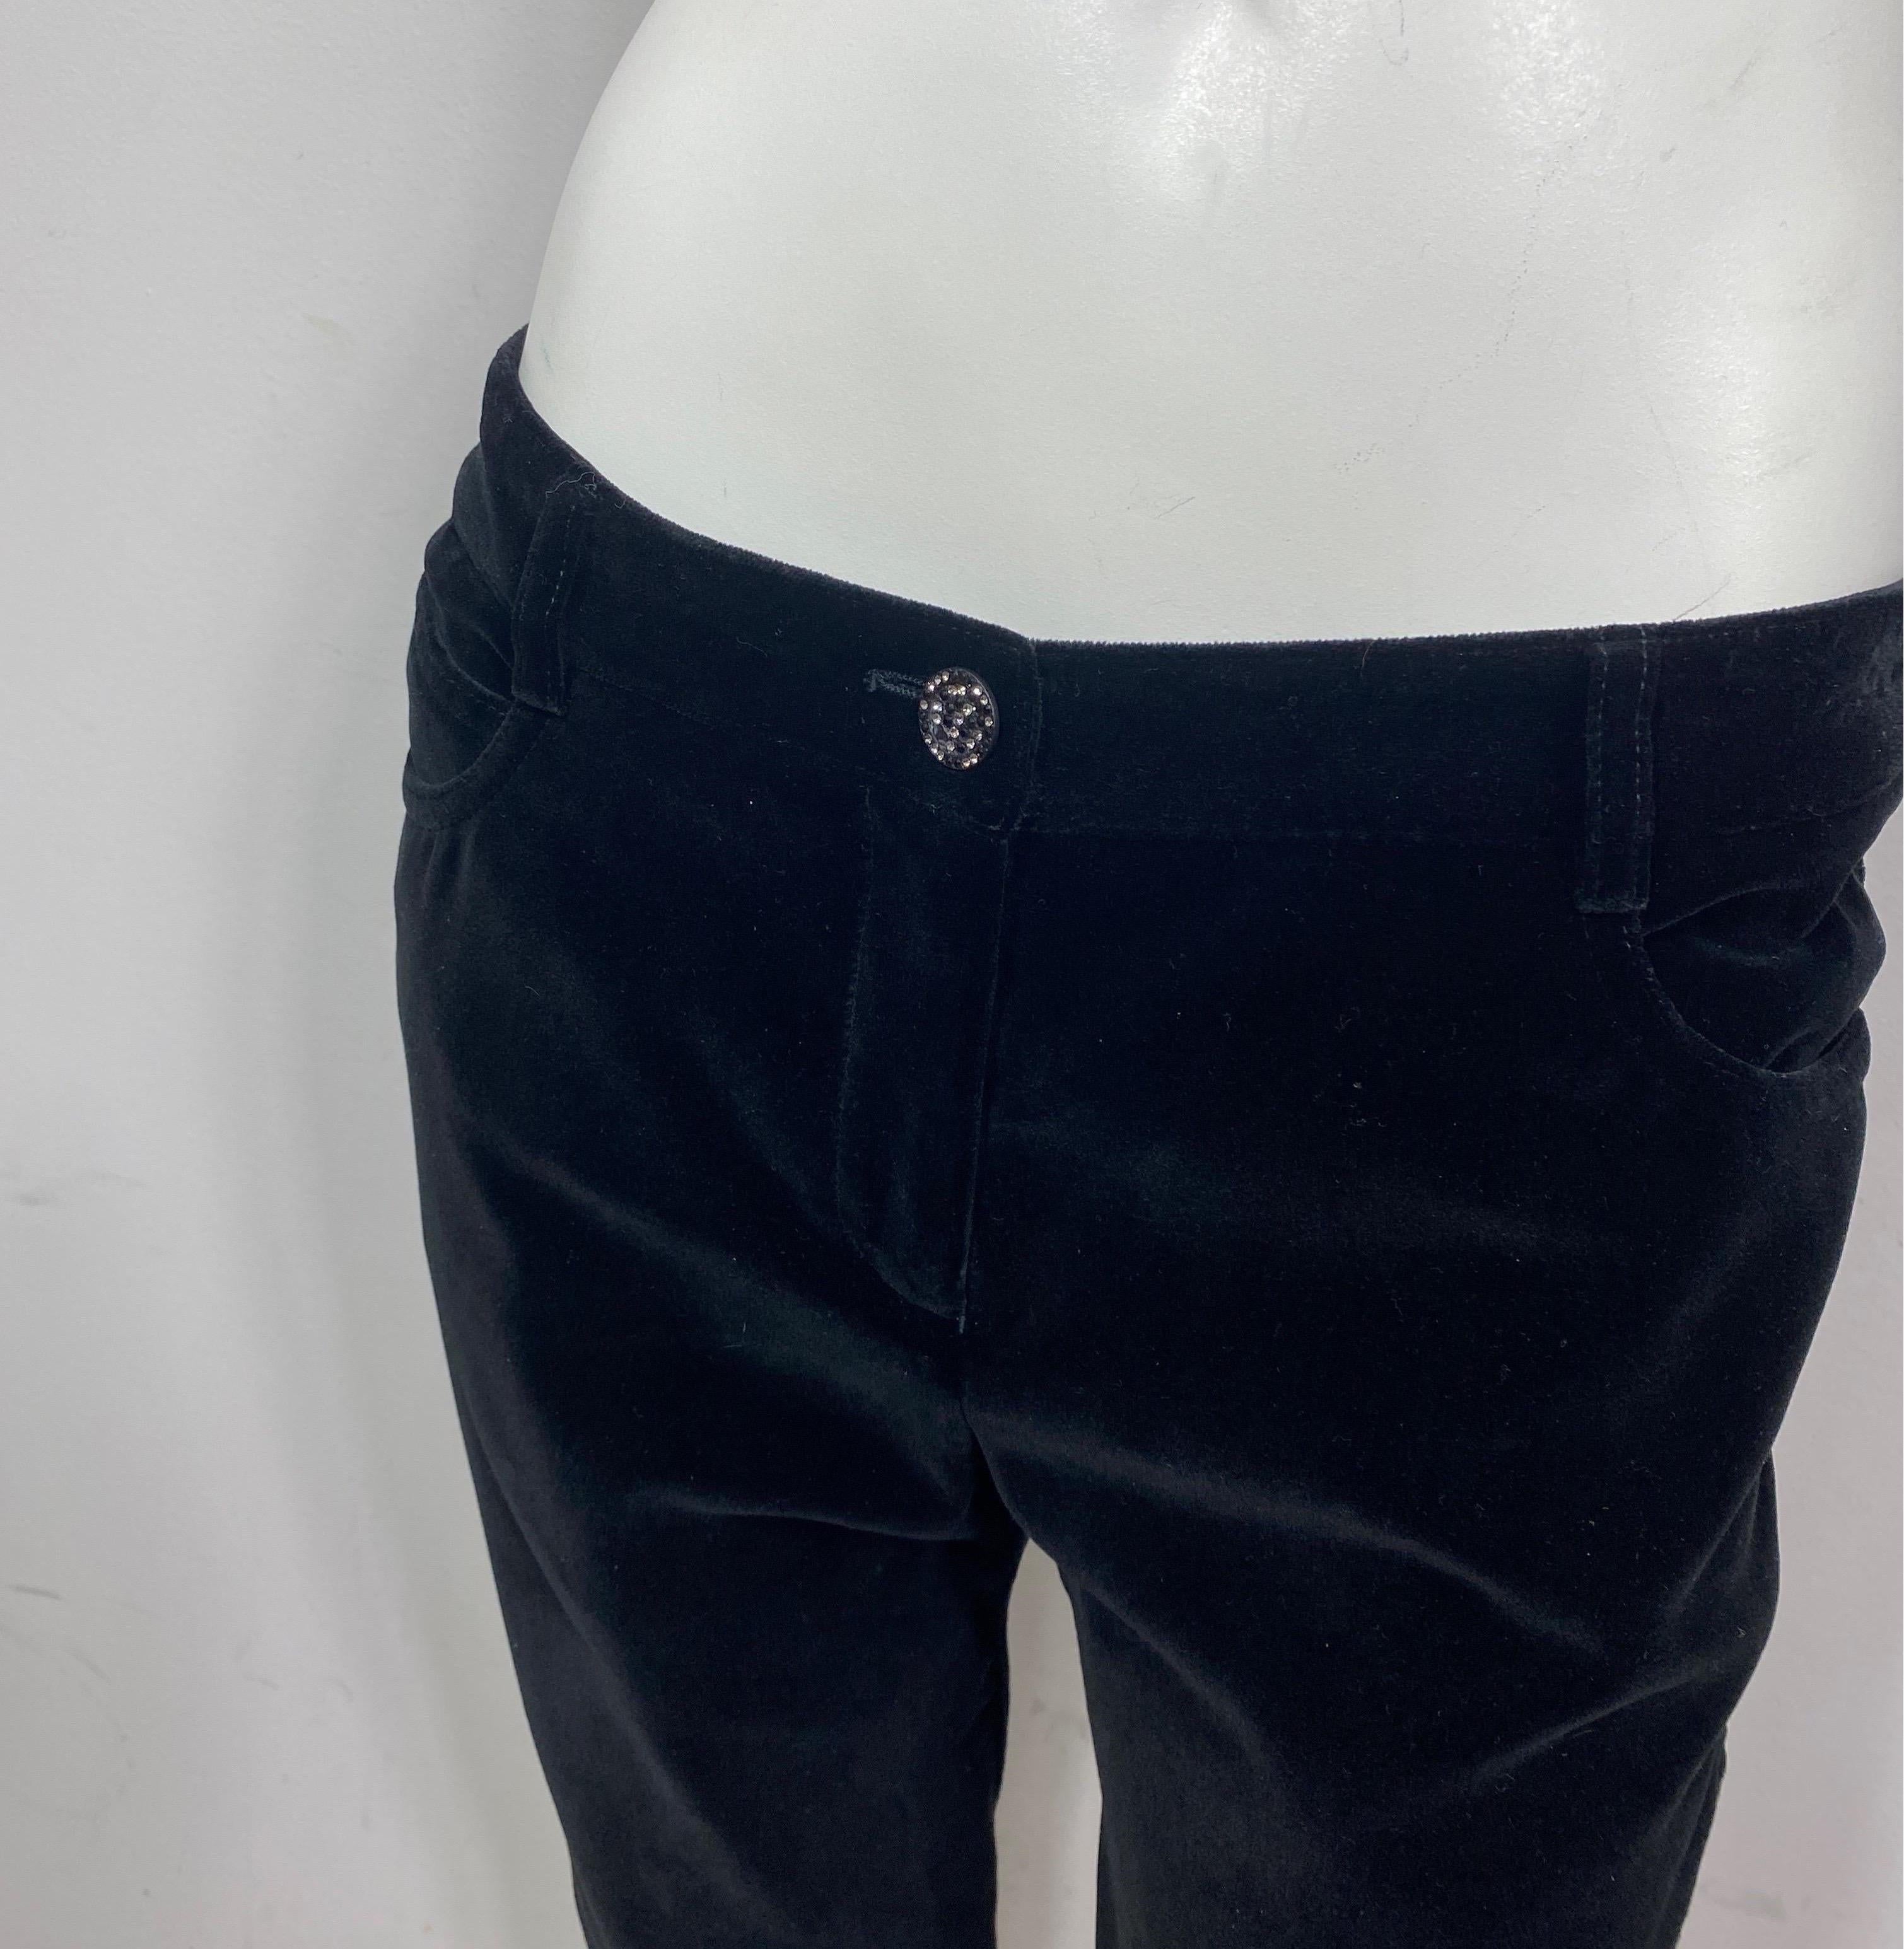 Chanel 2005A Black Velvet Slim Jean Cut Pant-Size 40 NWT In New Condition For Sale In West Palm Beach, FL